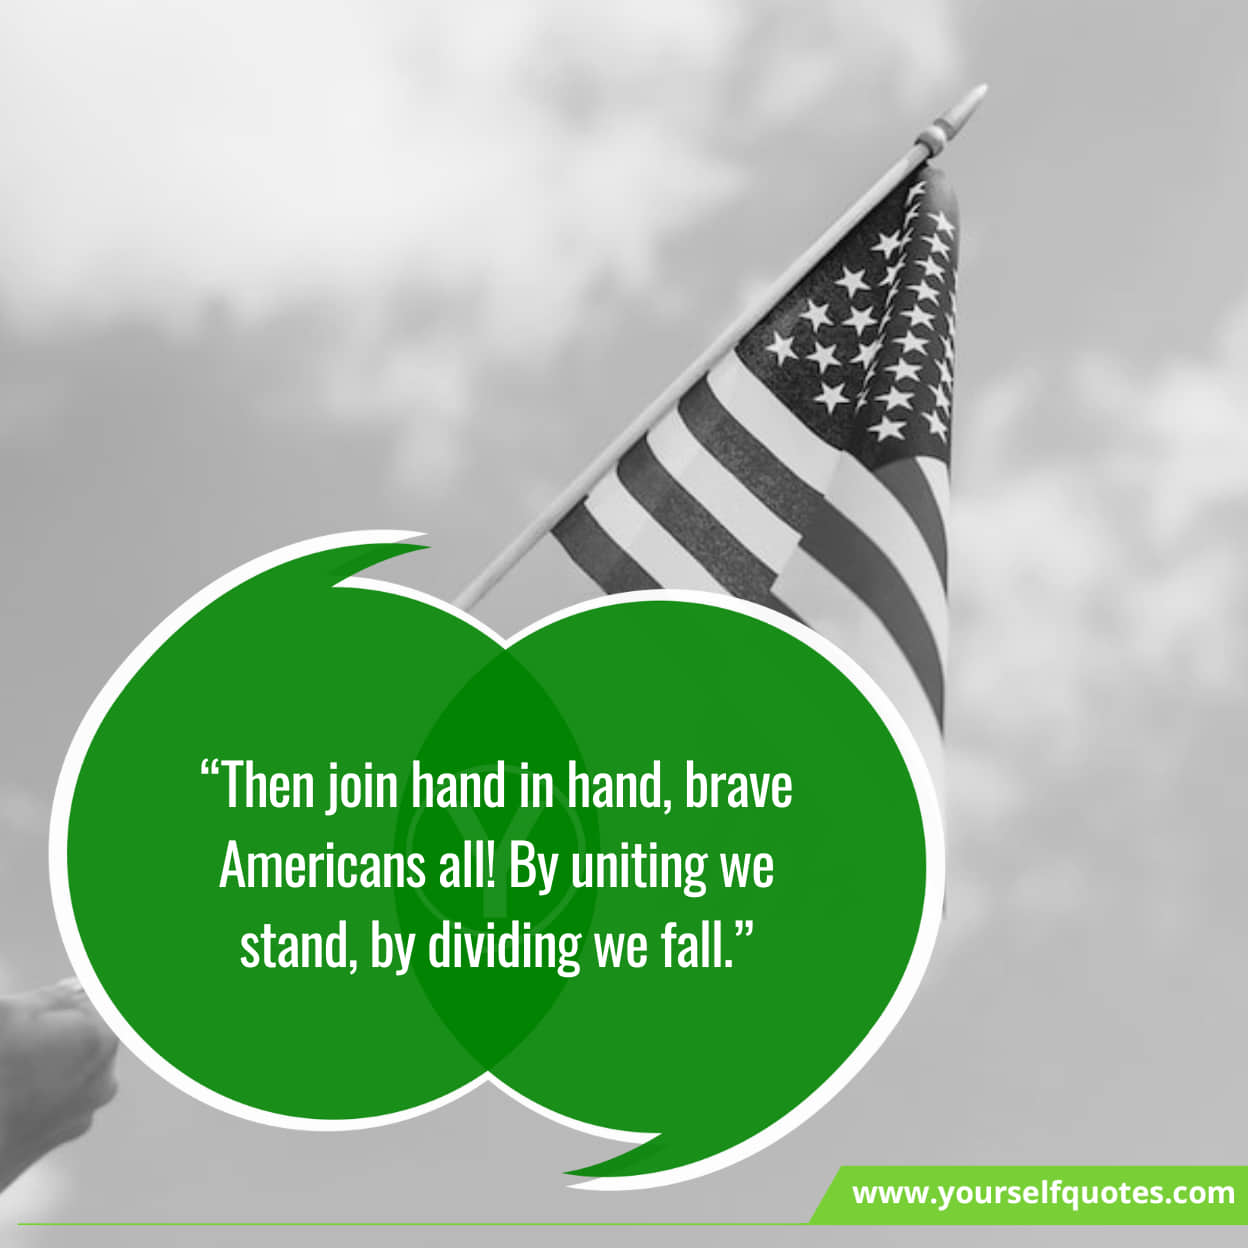 July 4th quotes to honor the USA's independence